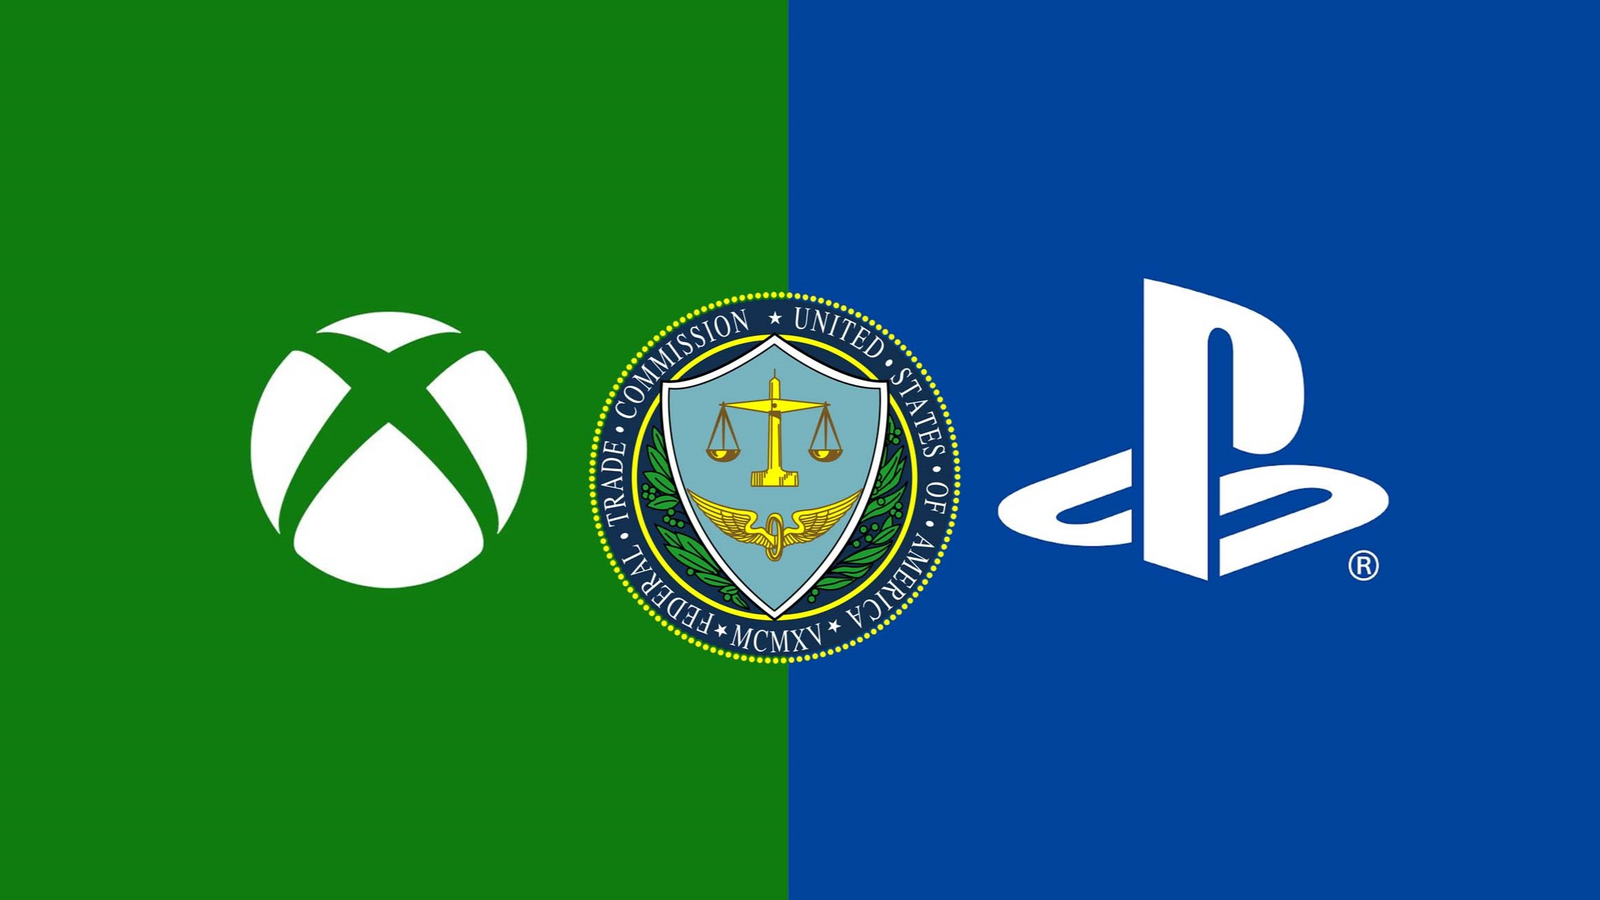 FTC Could Approve Microsoft's Activision Blizzard Acquisition Soon